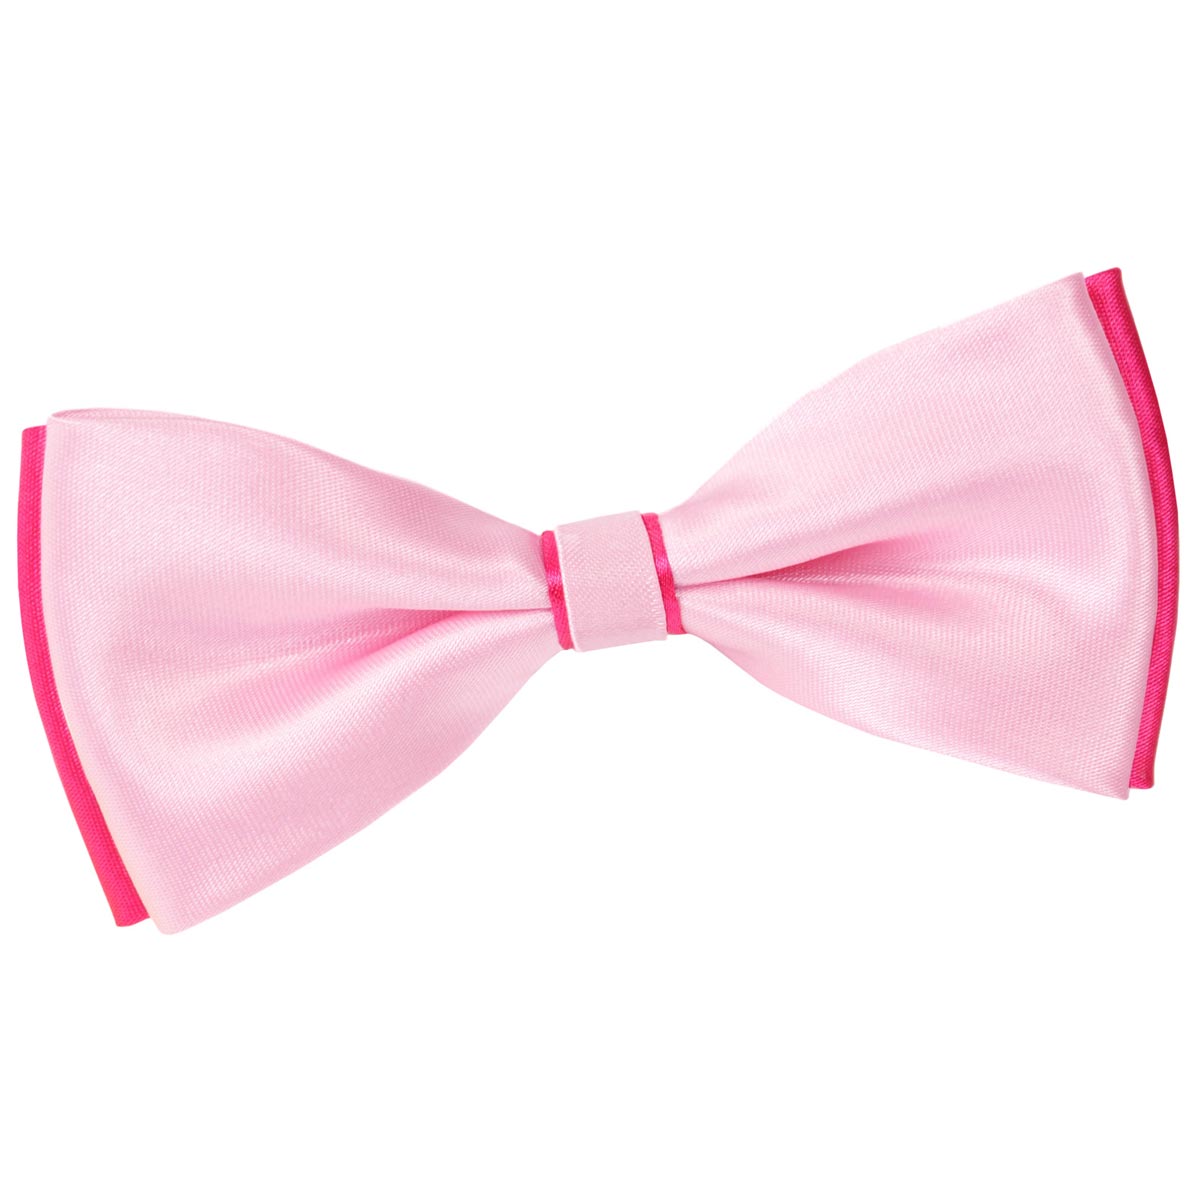 Noeud-papillon-bicolore-rose-pale-fuchsia-dandytouch--ND-00120_A12-1--